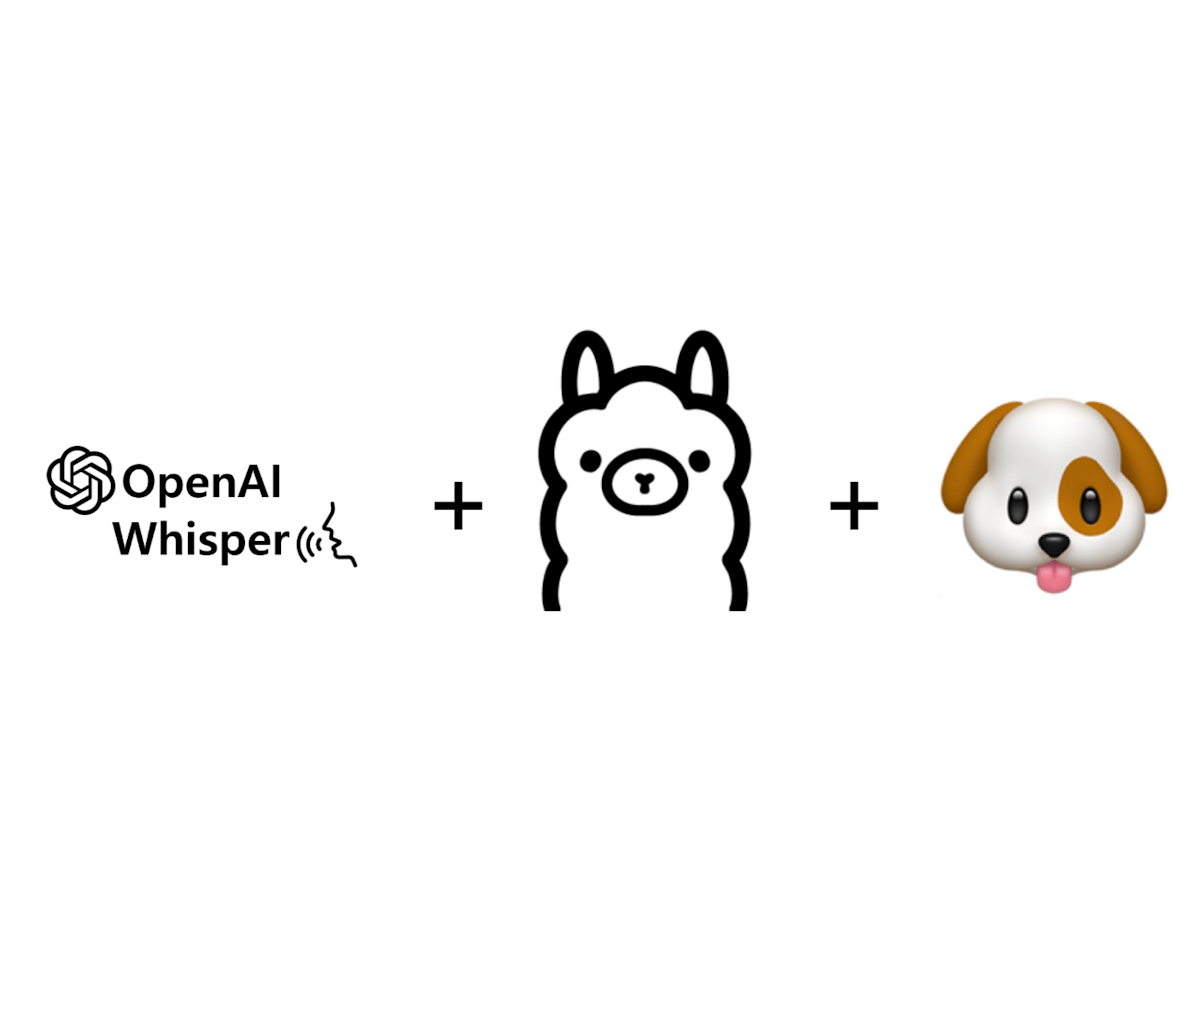 featured image - How to Build Your Own Voice Assistant and Run it Locally Using Whisper + Ollama + Bark